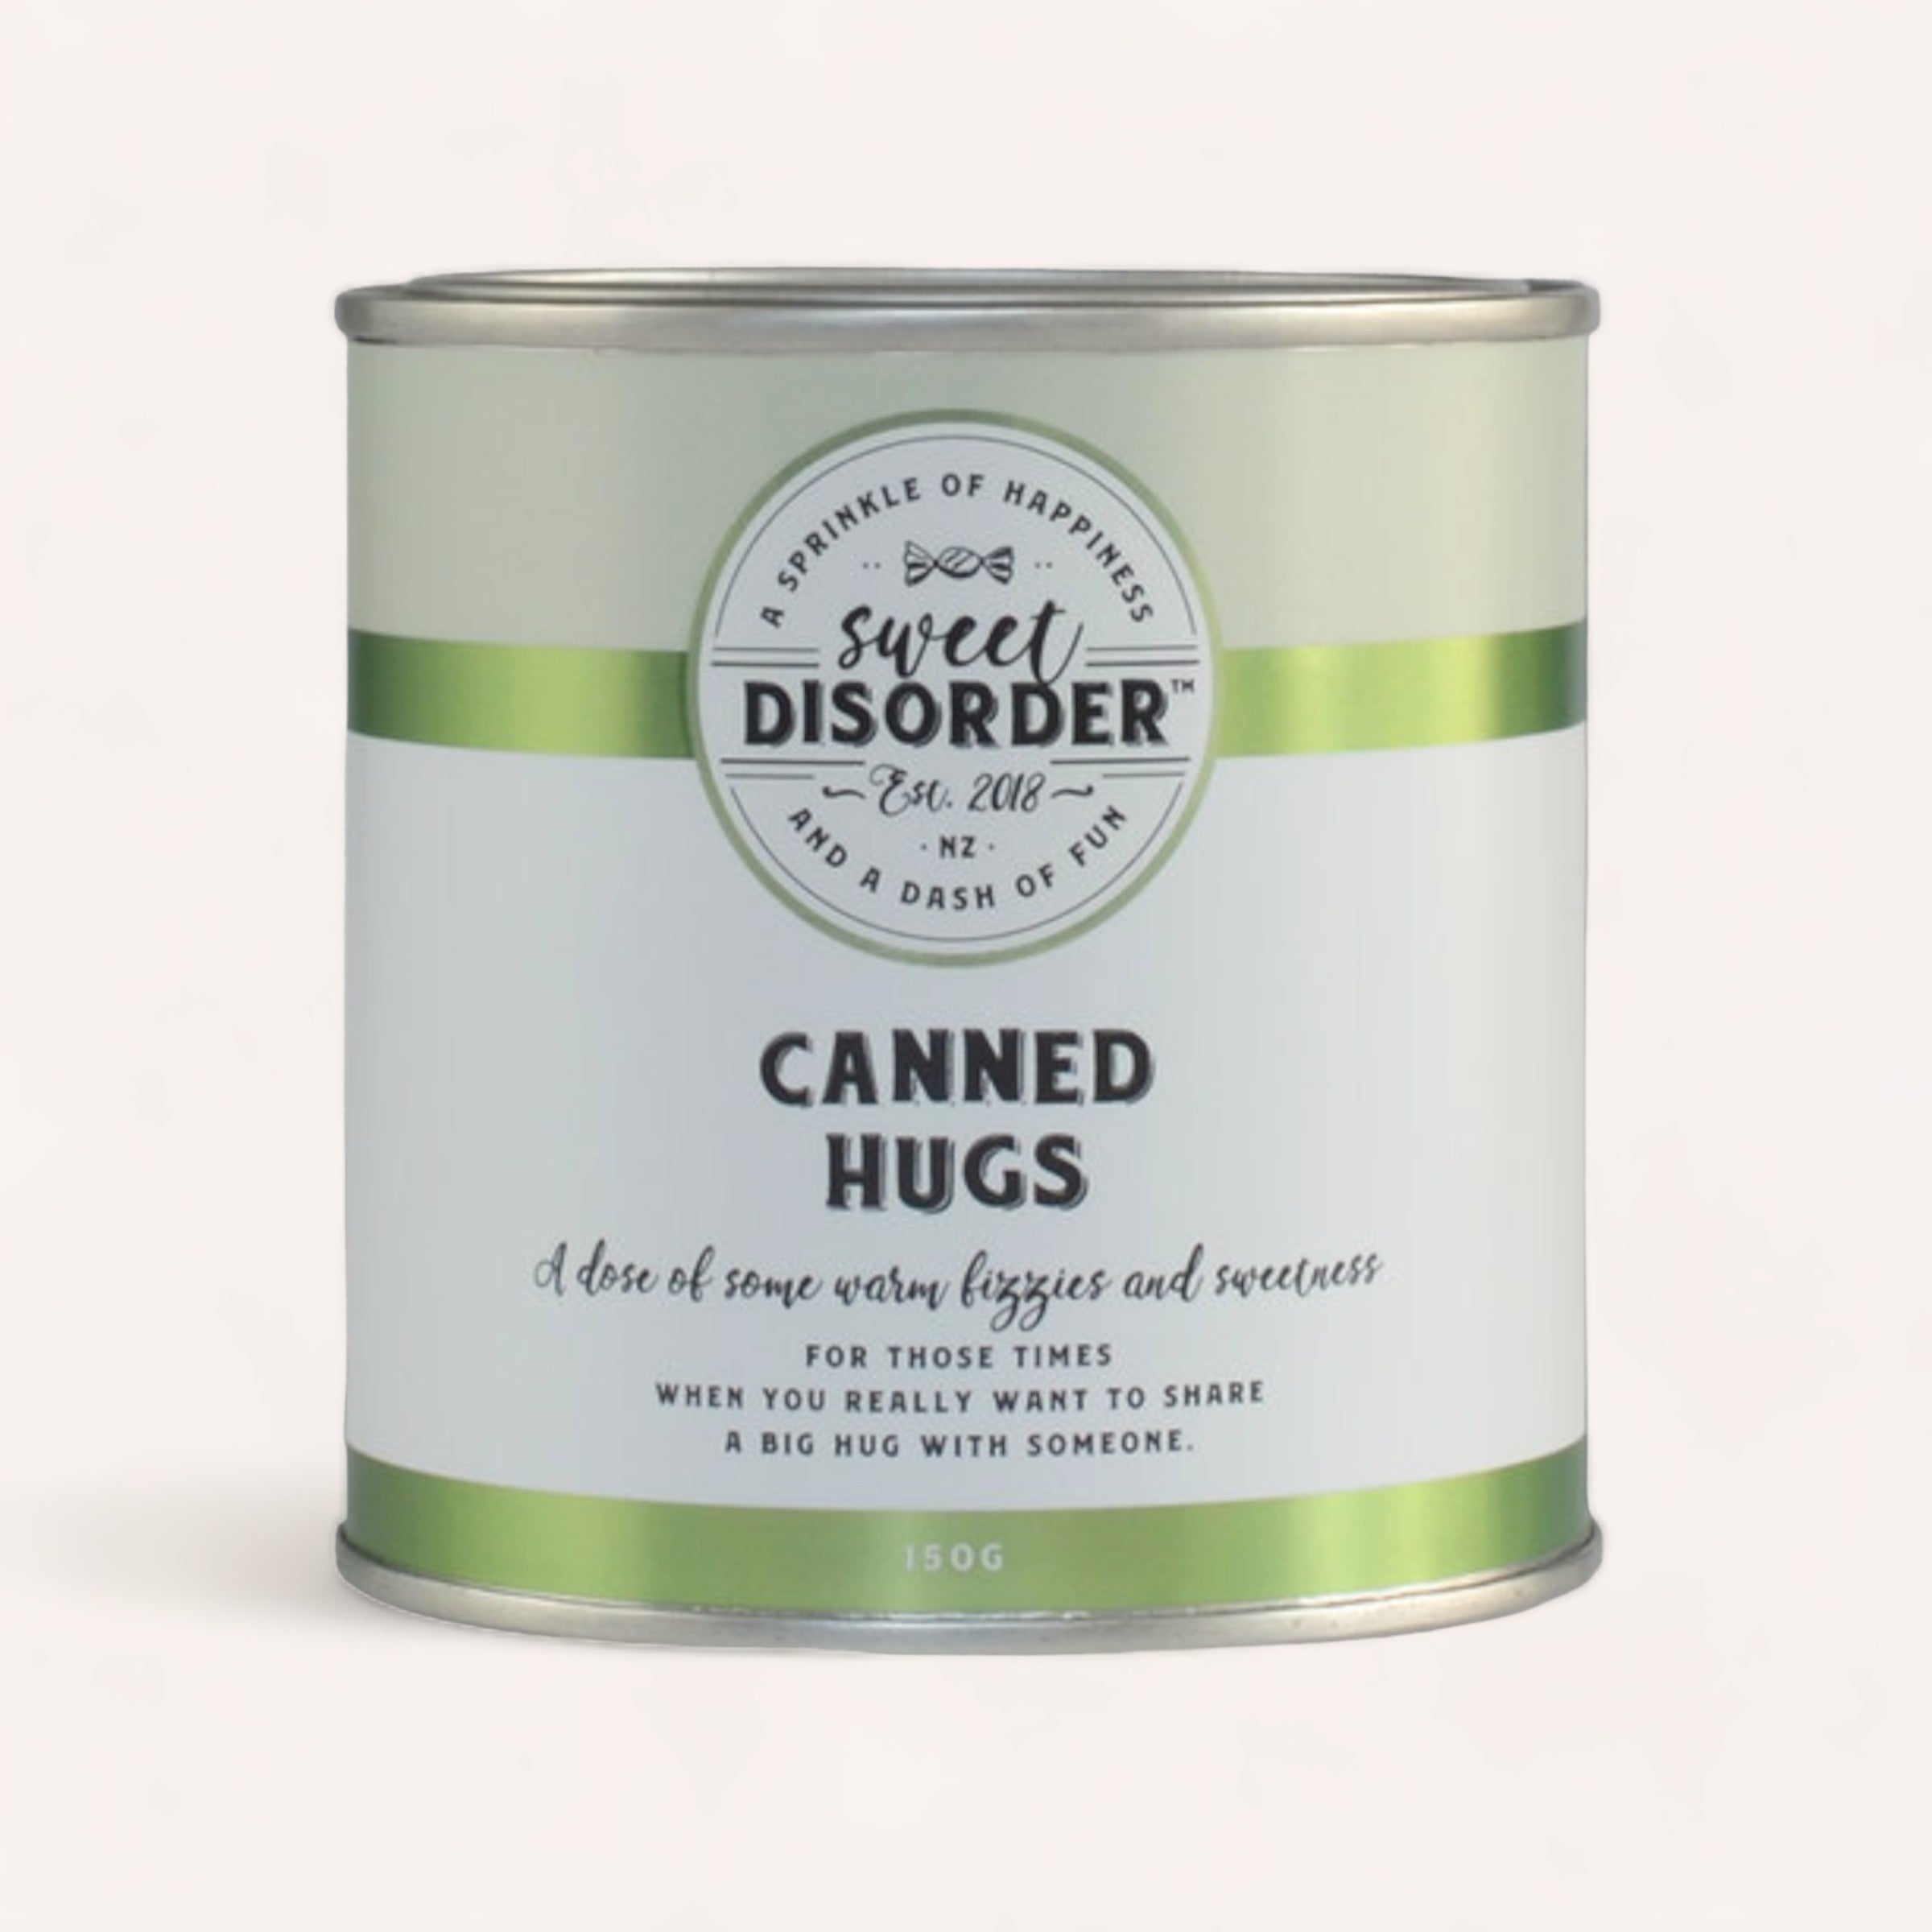 A can labeled "Sweet Disorder Canned Hugs," designed to symbolize warmth, fuzziness, and containing New Zealand sour gummy hug shaped fruit rings, intended as a cute and light-hearted gift for those.